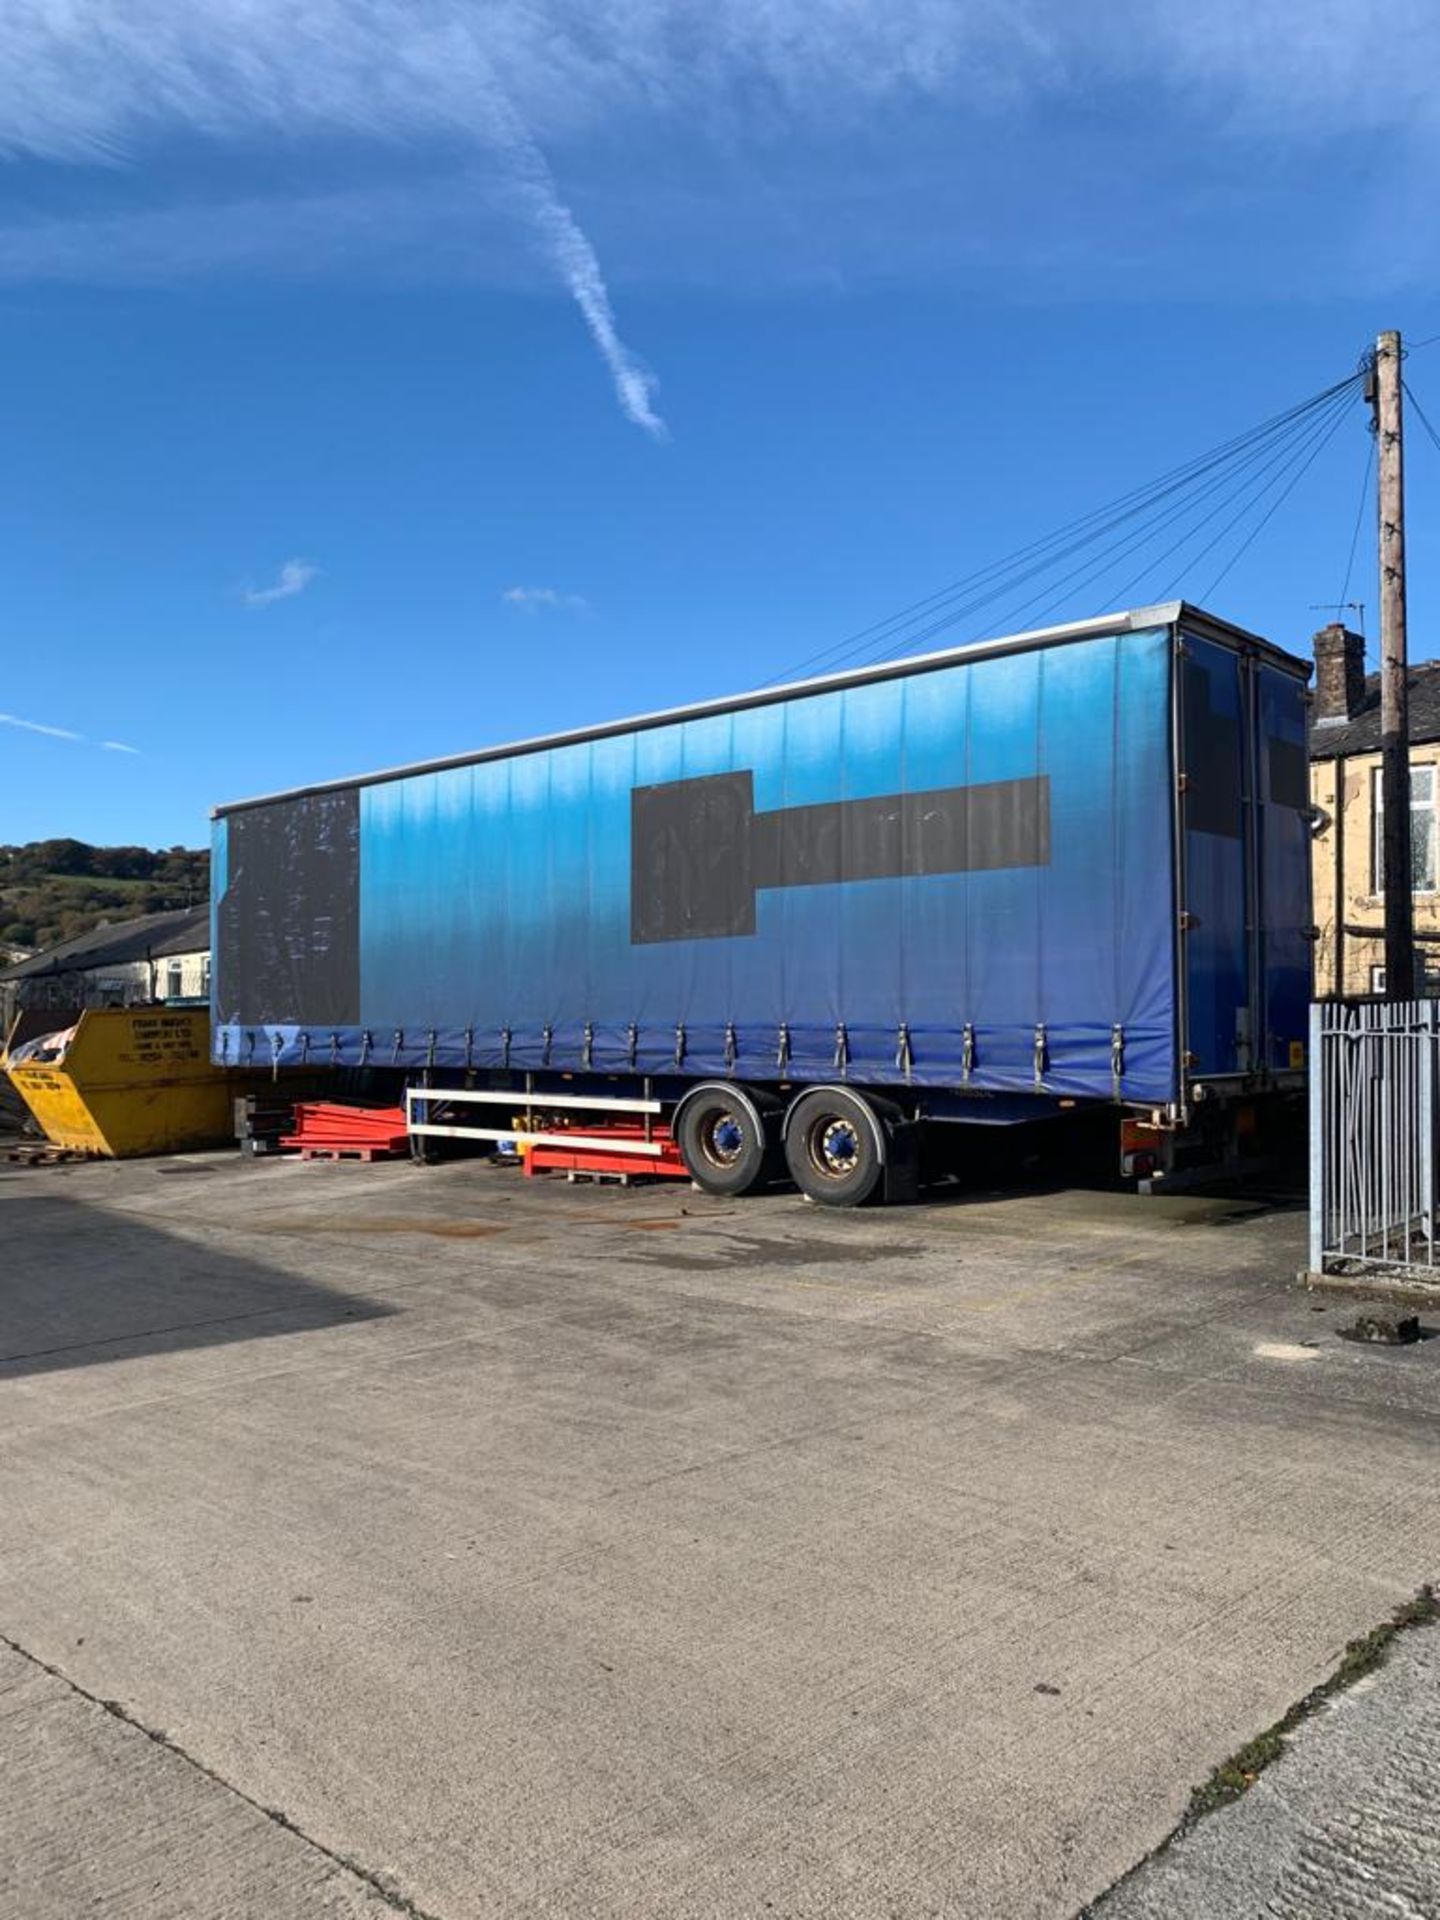 SDC 13500 X 2550 Twin Axle Curtain Sided Trailer (2004) and Contents of Timber Offcuts